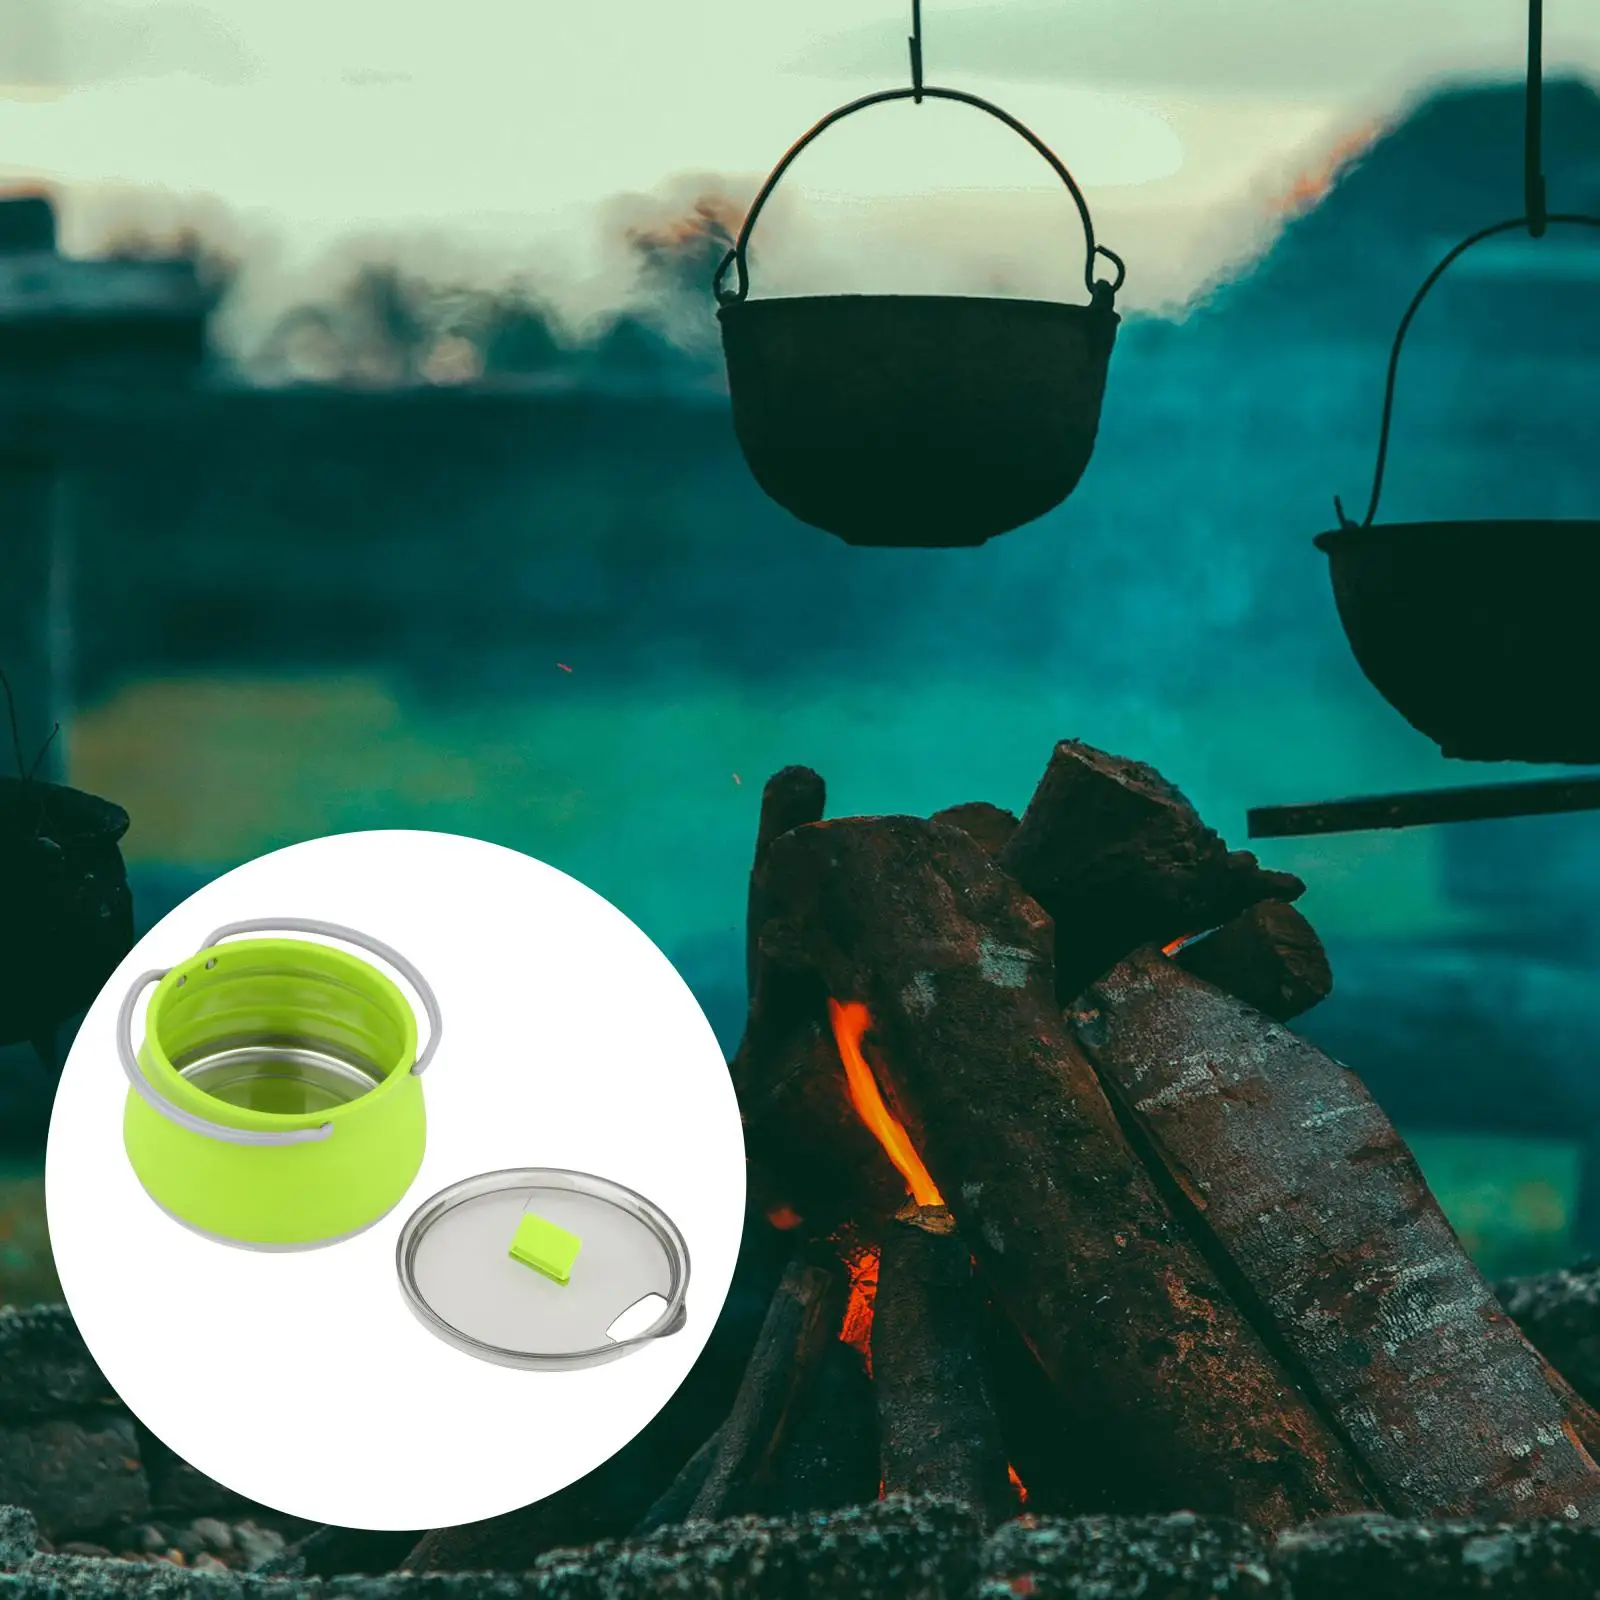 Food Grade Silicone Travel Foldable Pot Portable Collapsible Camping Kettle for Coffee Milk Heater Kitchen Home Travel Supplies